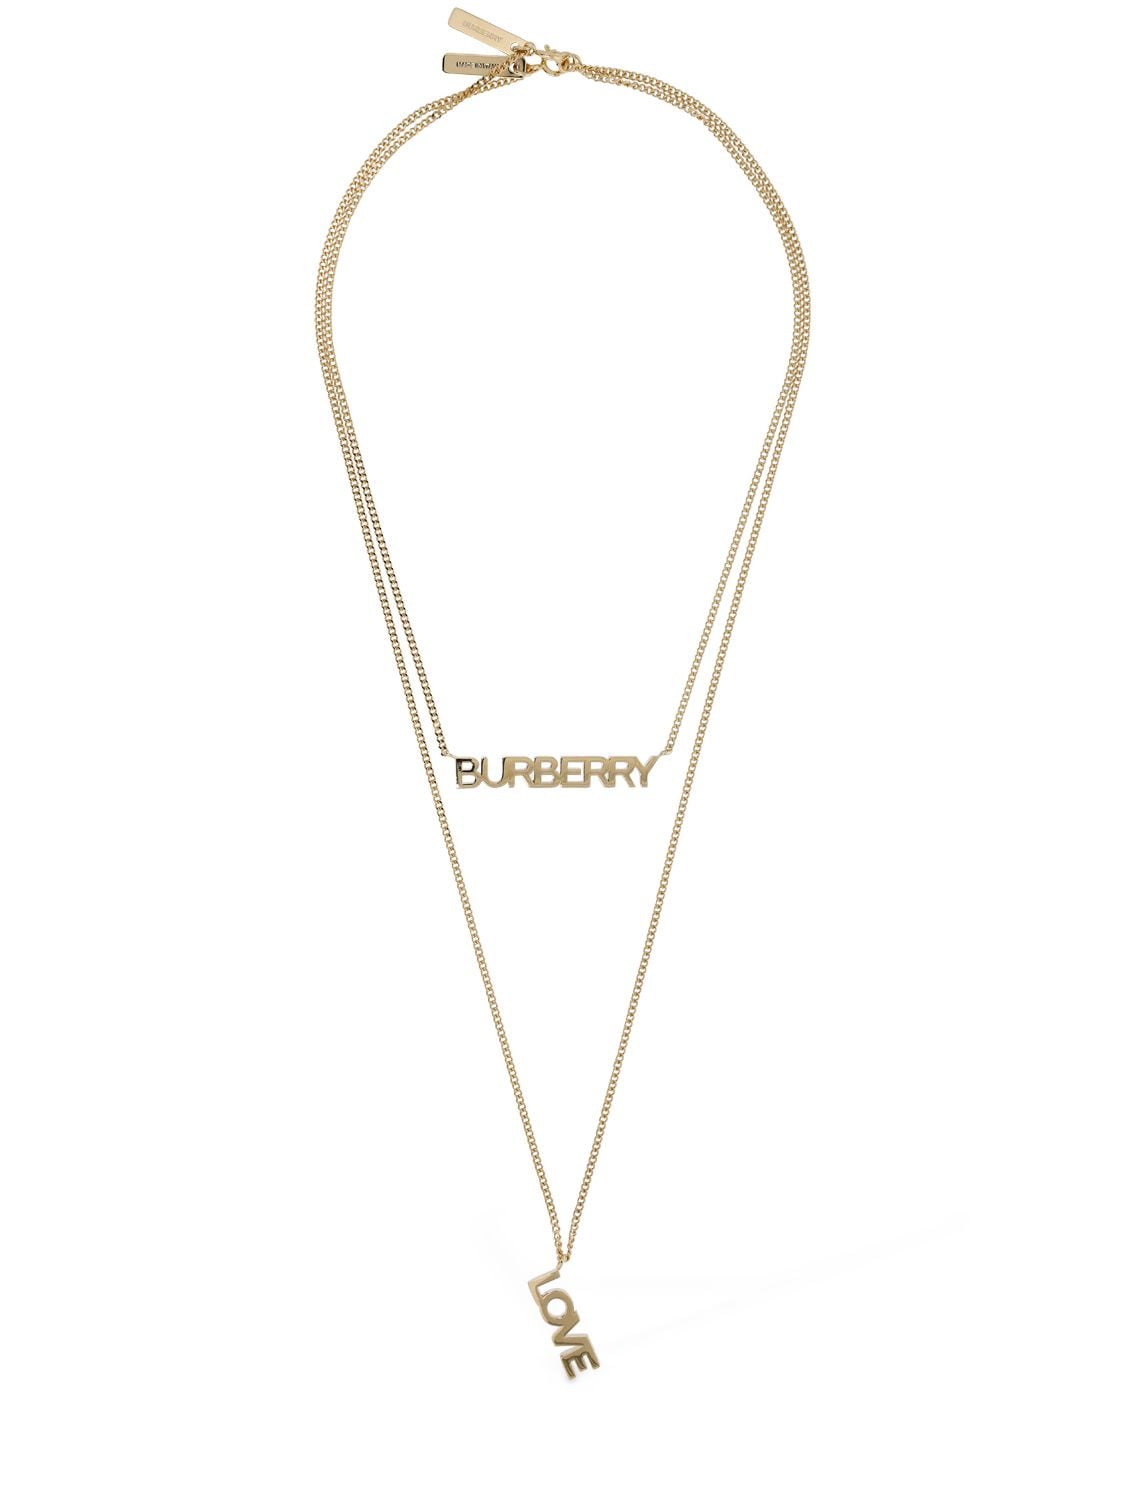 Burberry & Love Letter Necklace In Gold | ModeSens